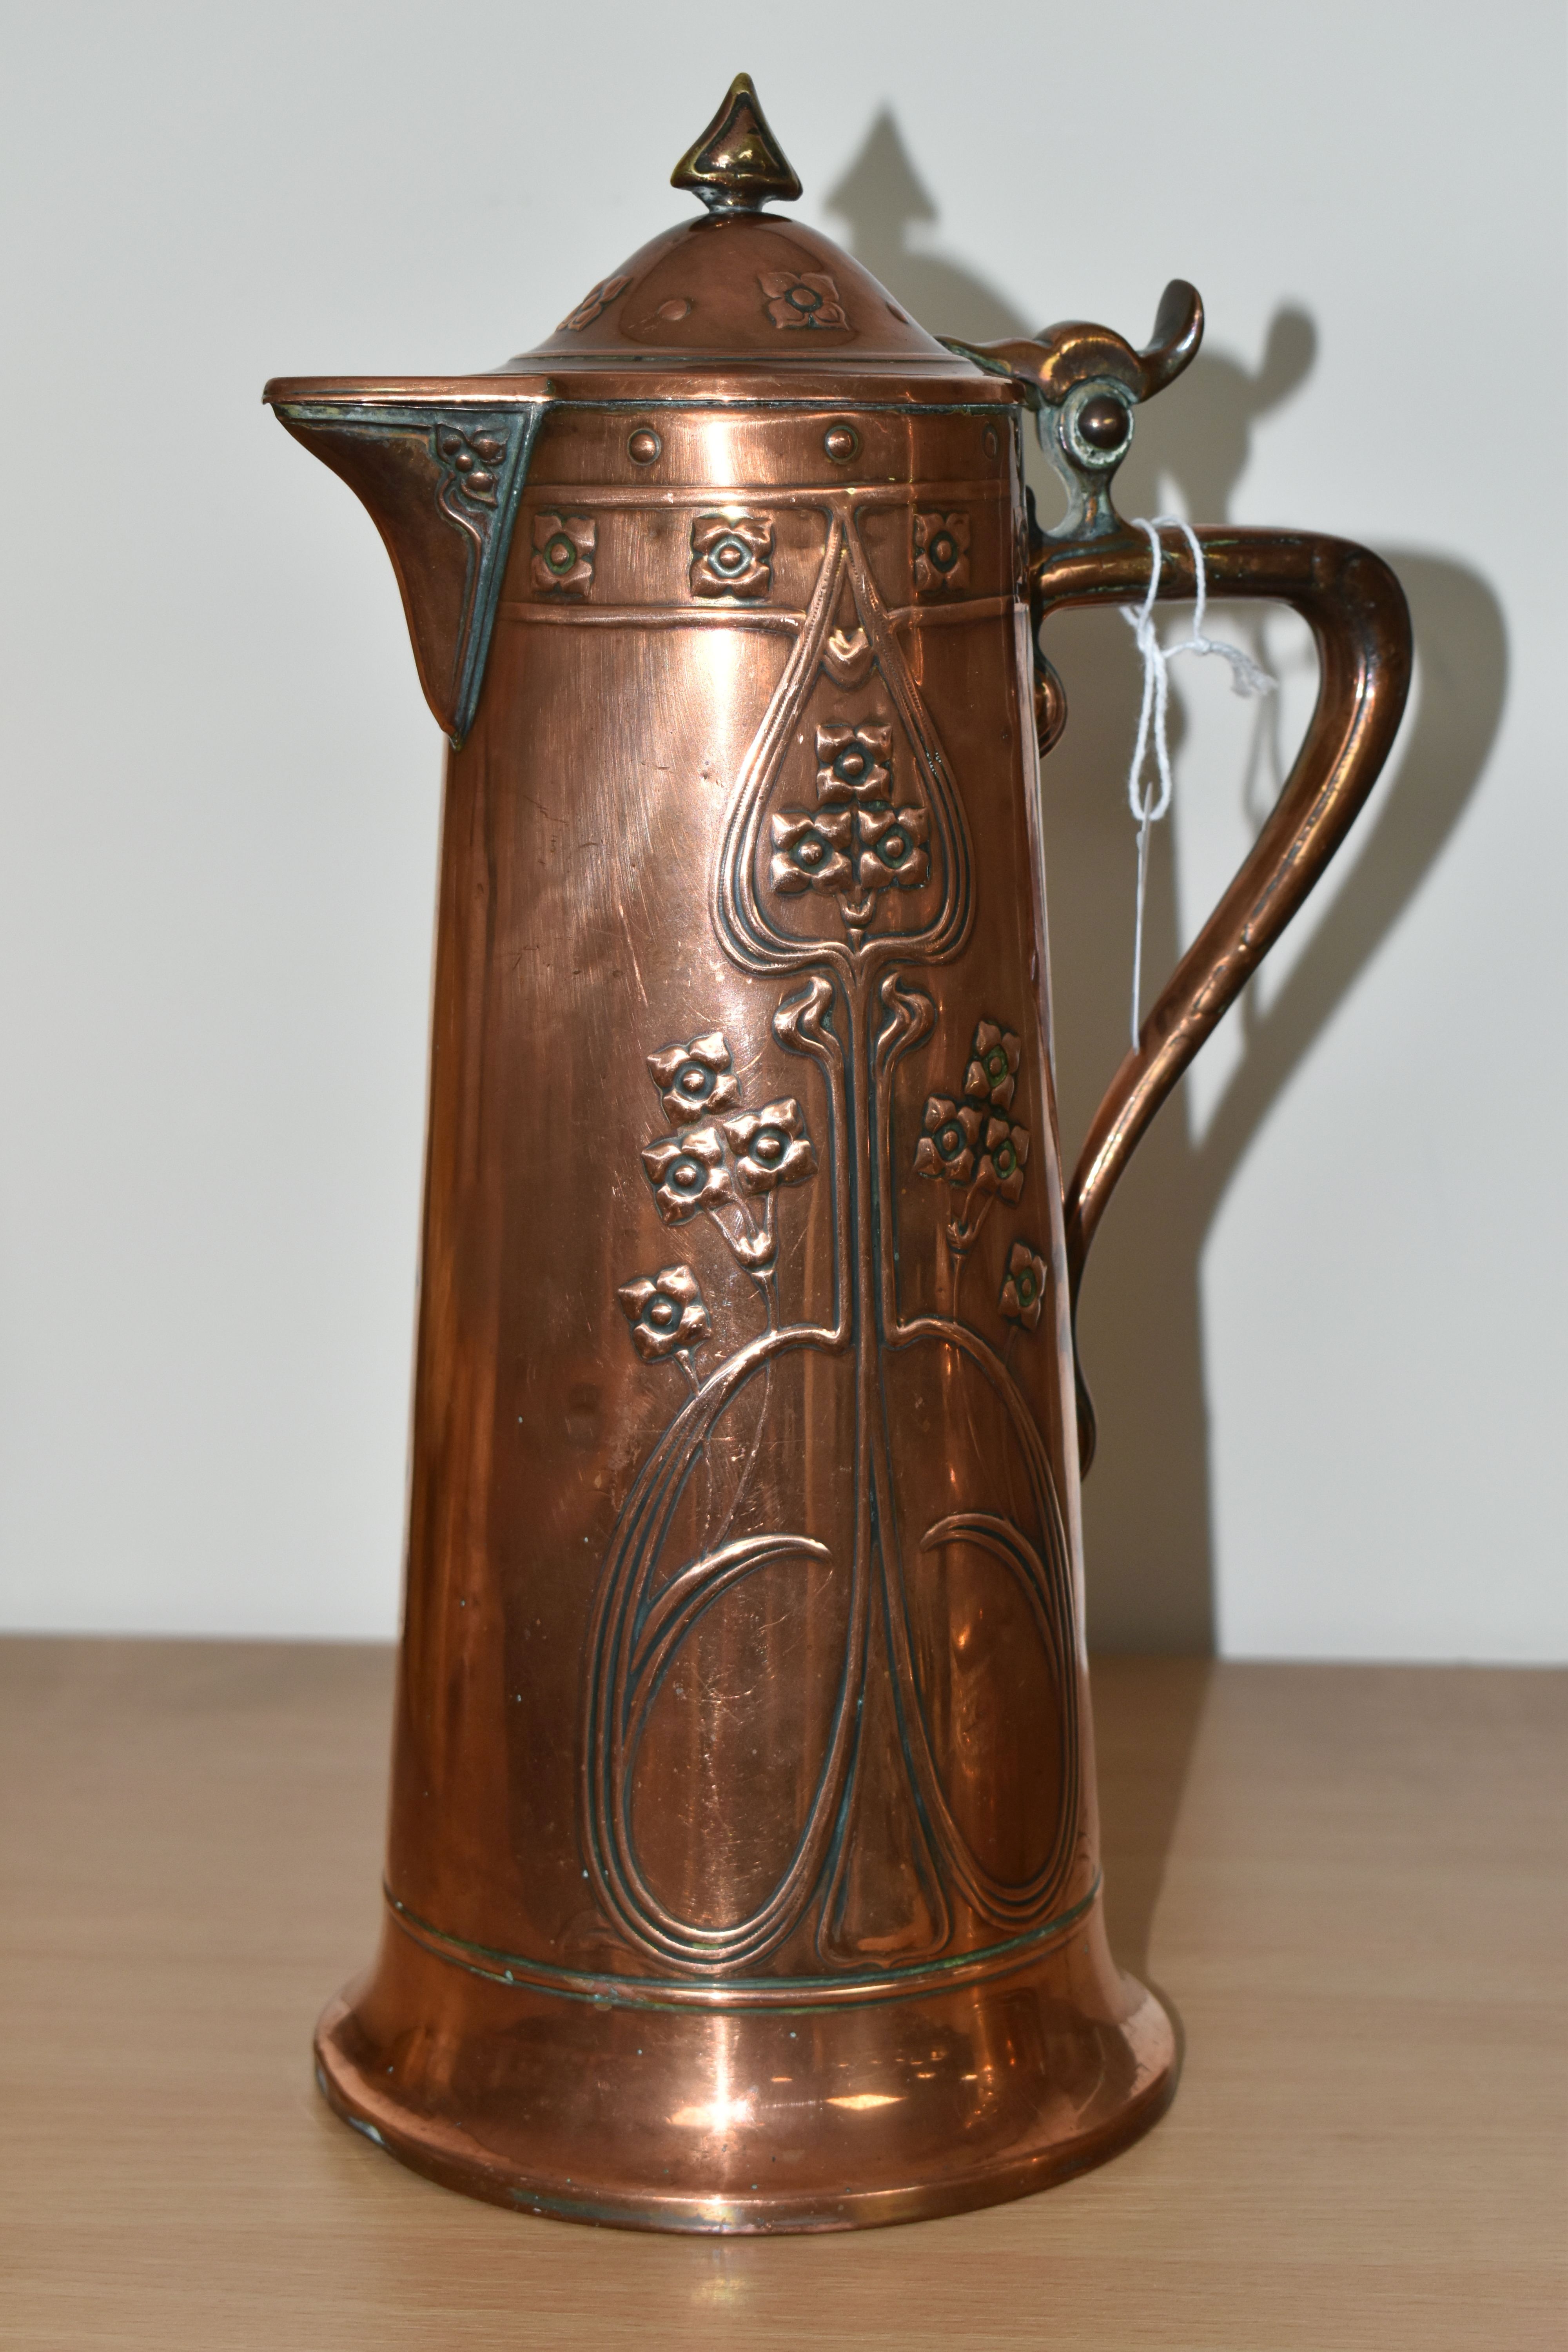 AN ART NOUVEAU COPPER JUG BY JOSEPH SANKEY & SONS, of covered tapering form, with stylised Art